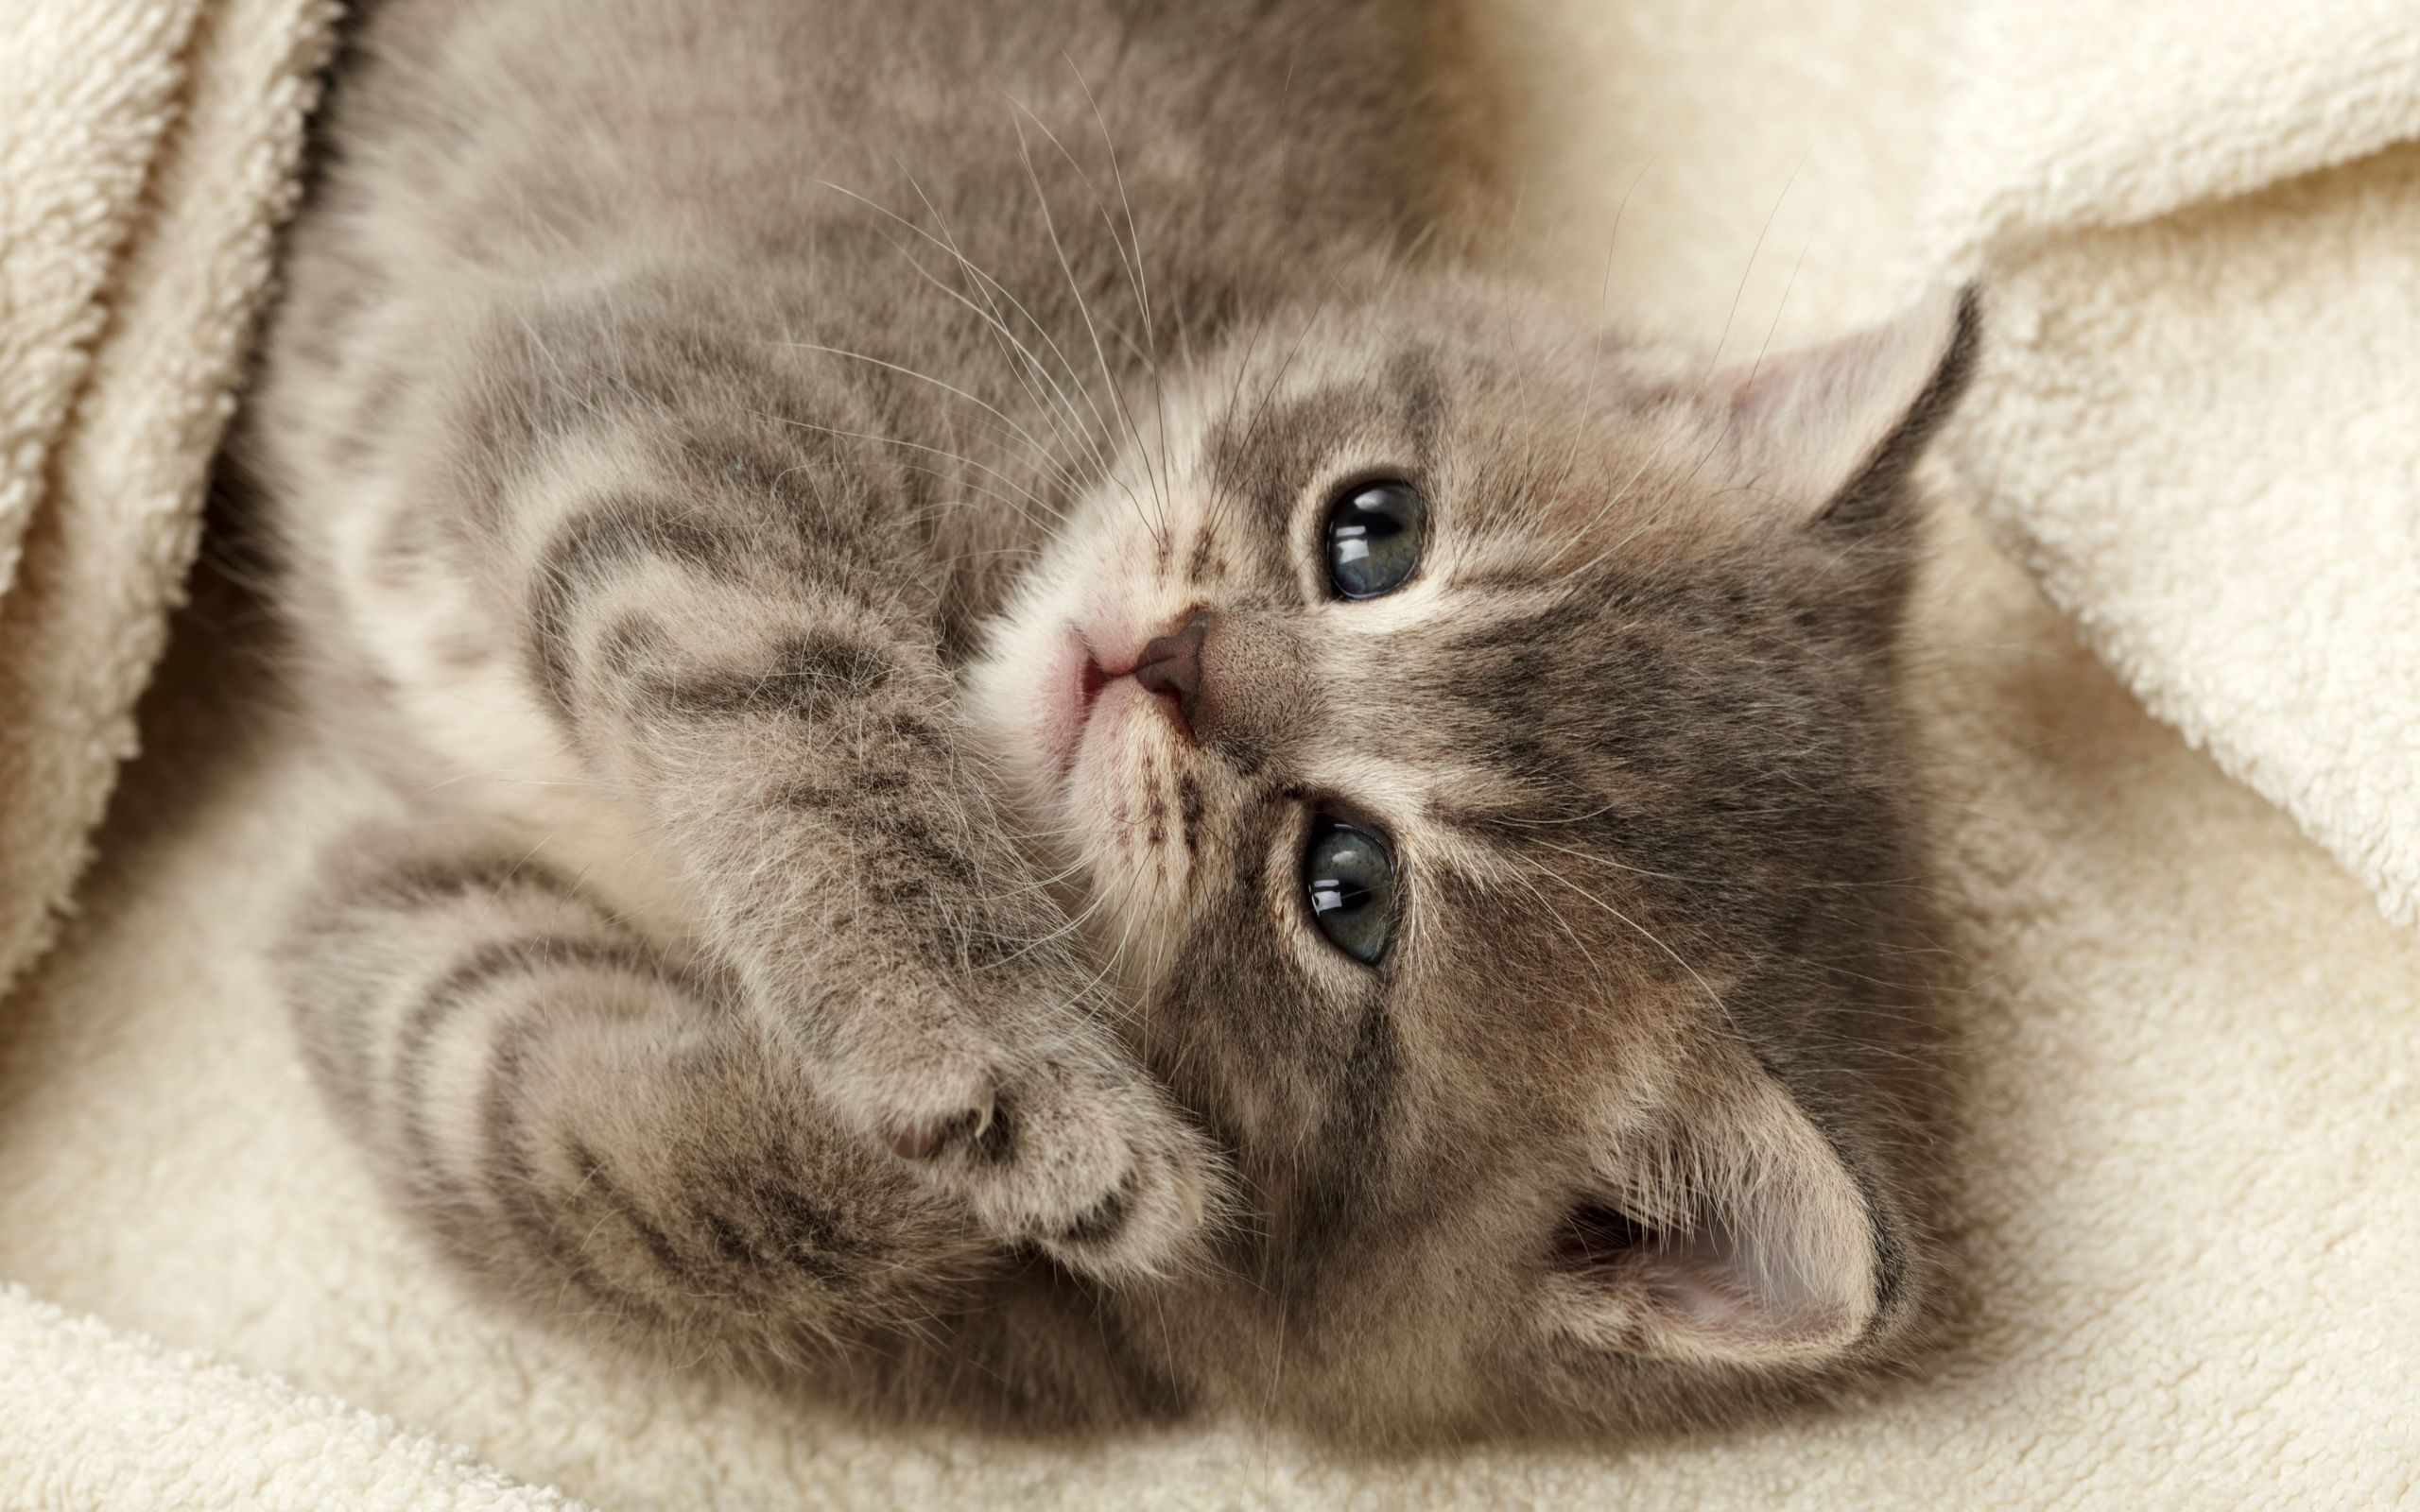 Grey kitten wallpapers and images - wallpapers, pictures, photos